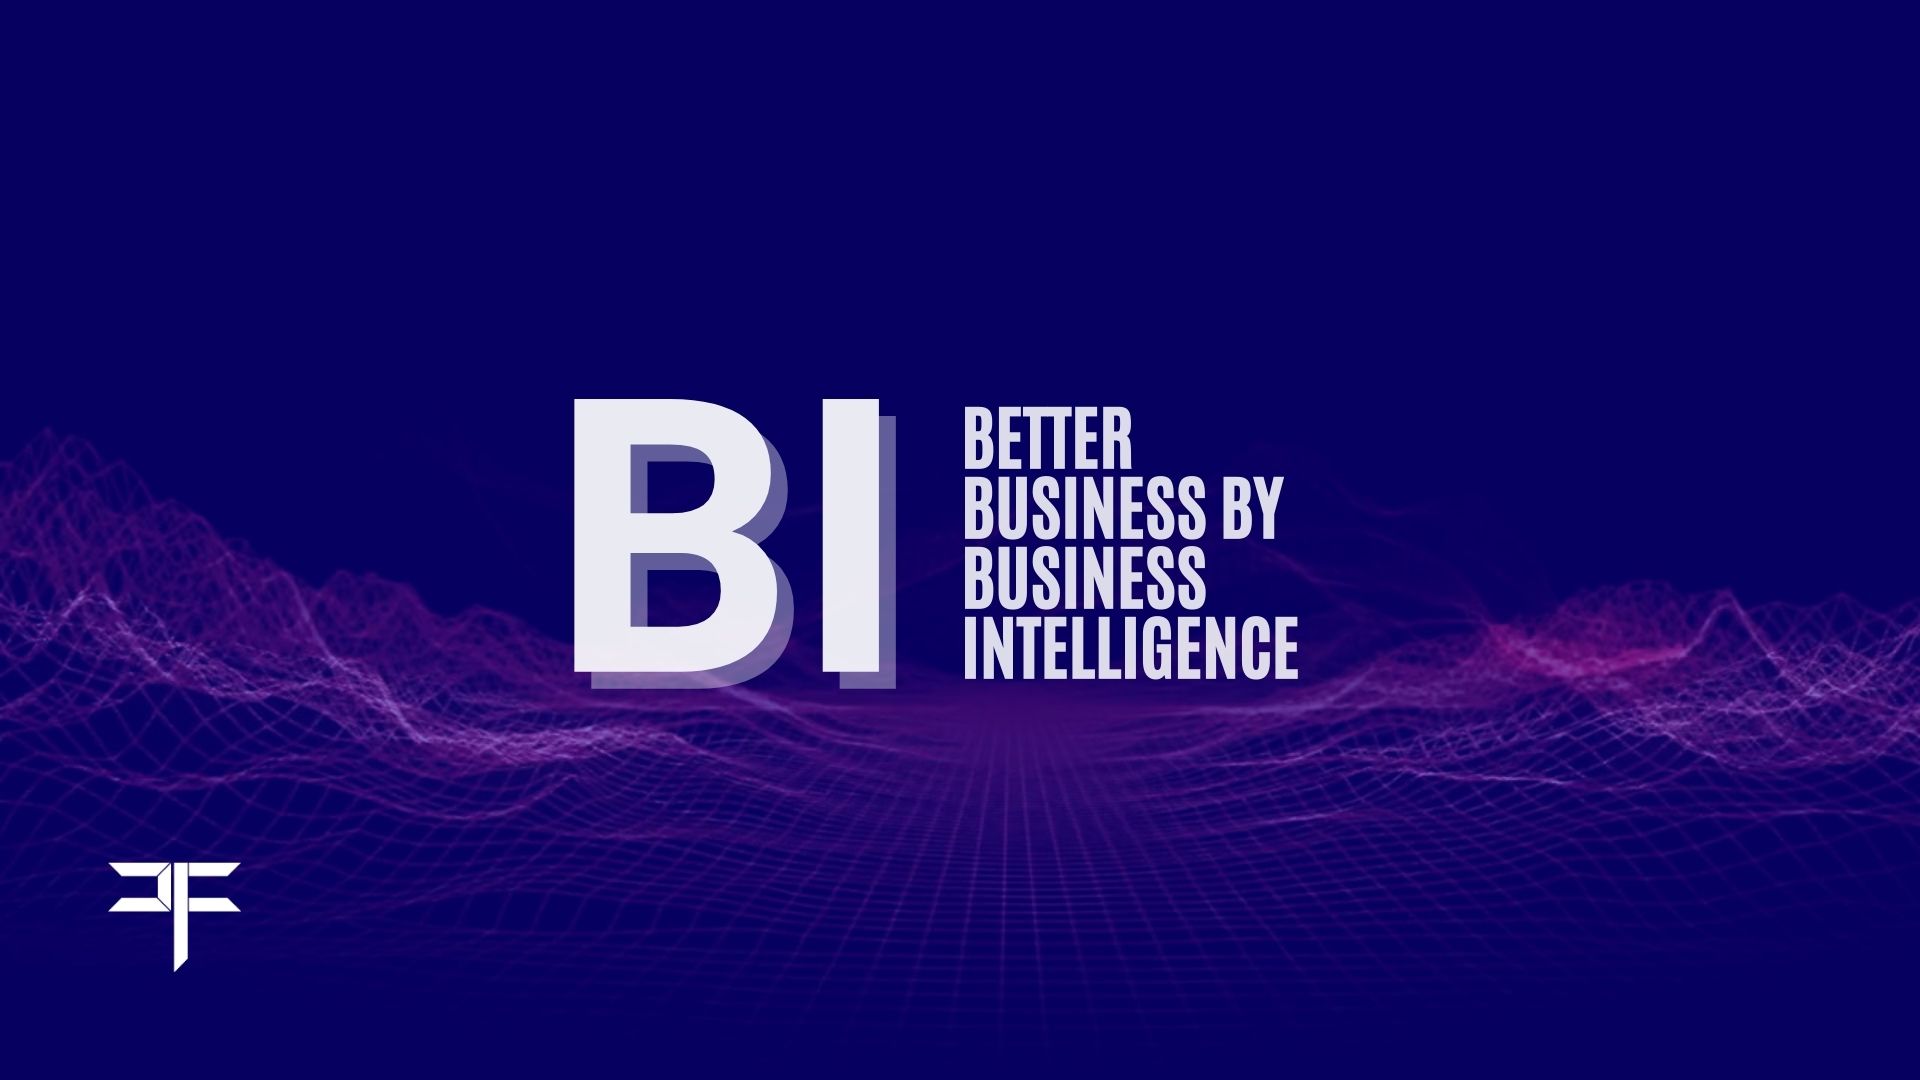 Your guide to Business Intelligence (BI) and why it matters